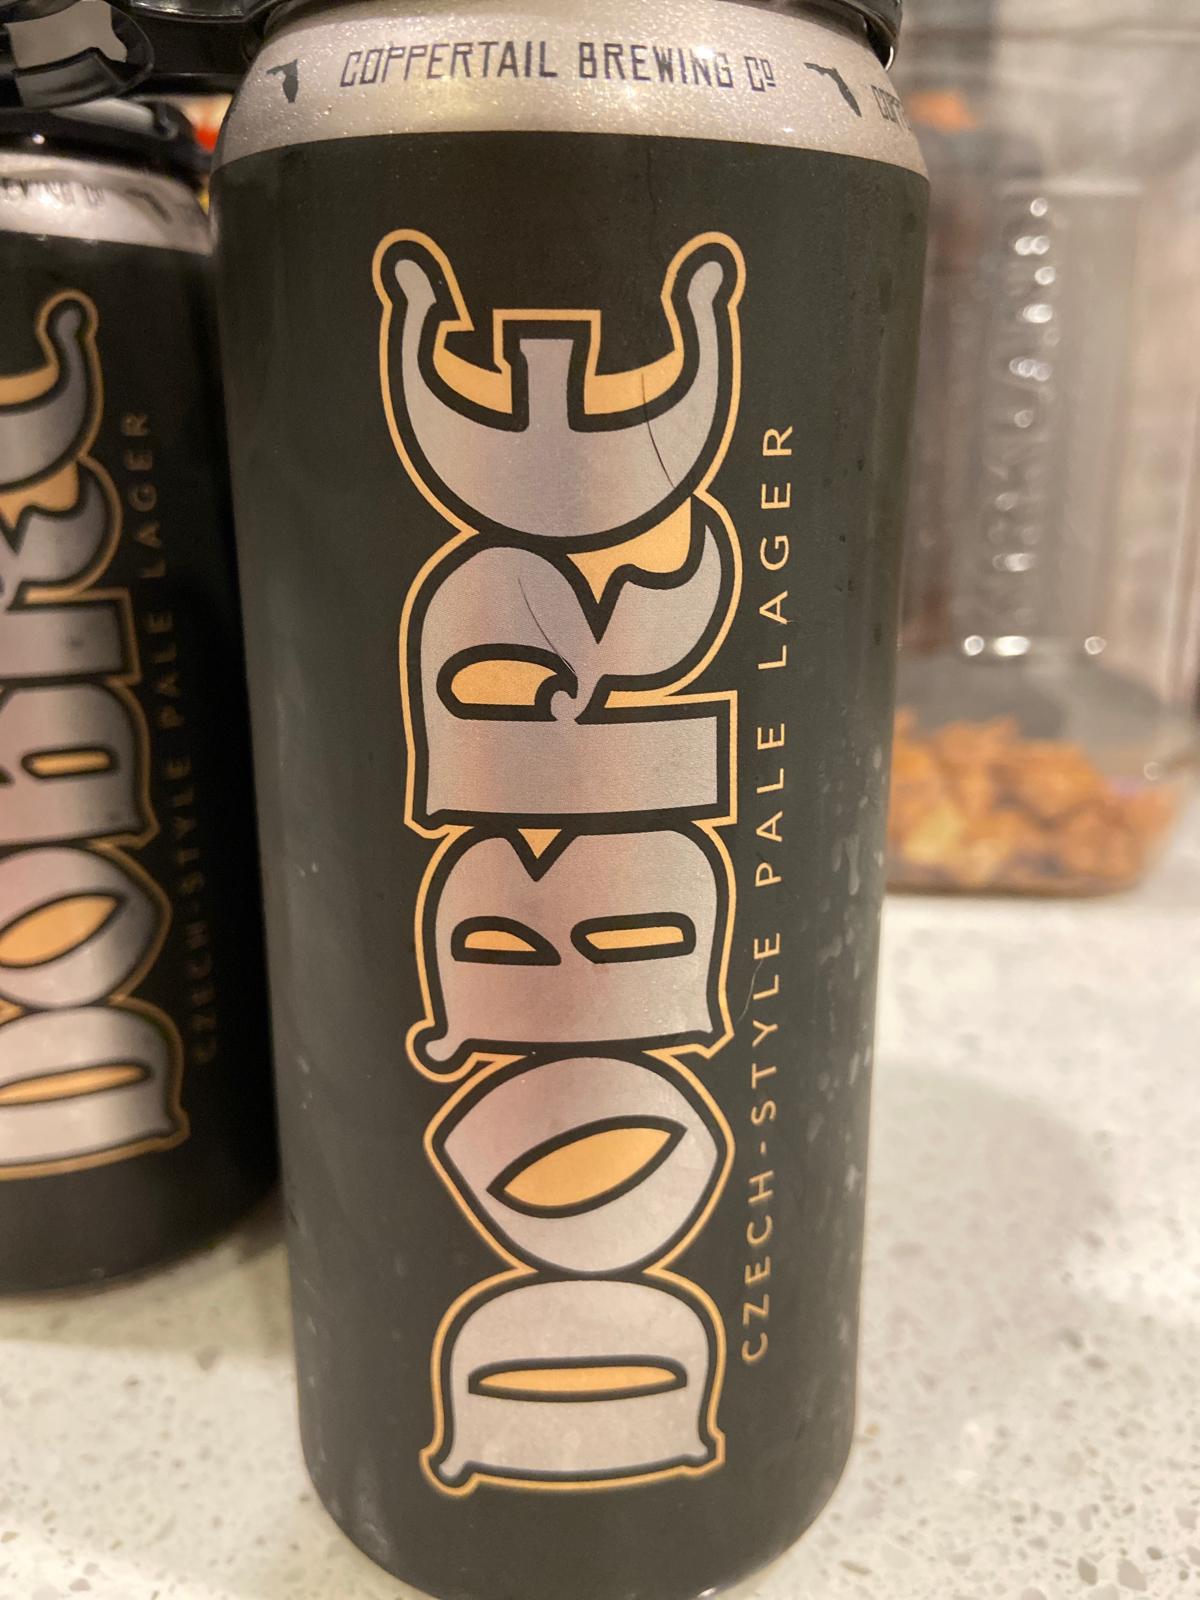 Dobre (Collaboration with Obow Brewing Company)